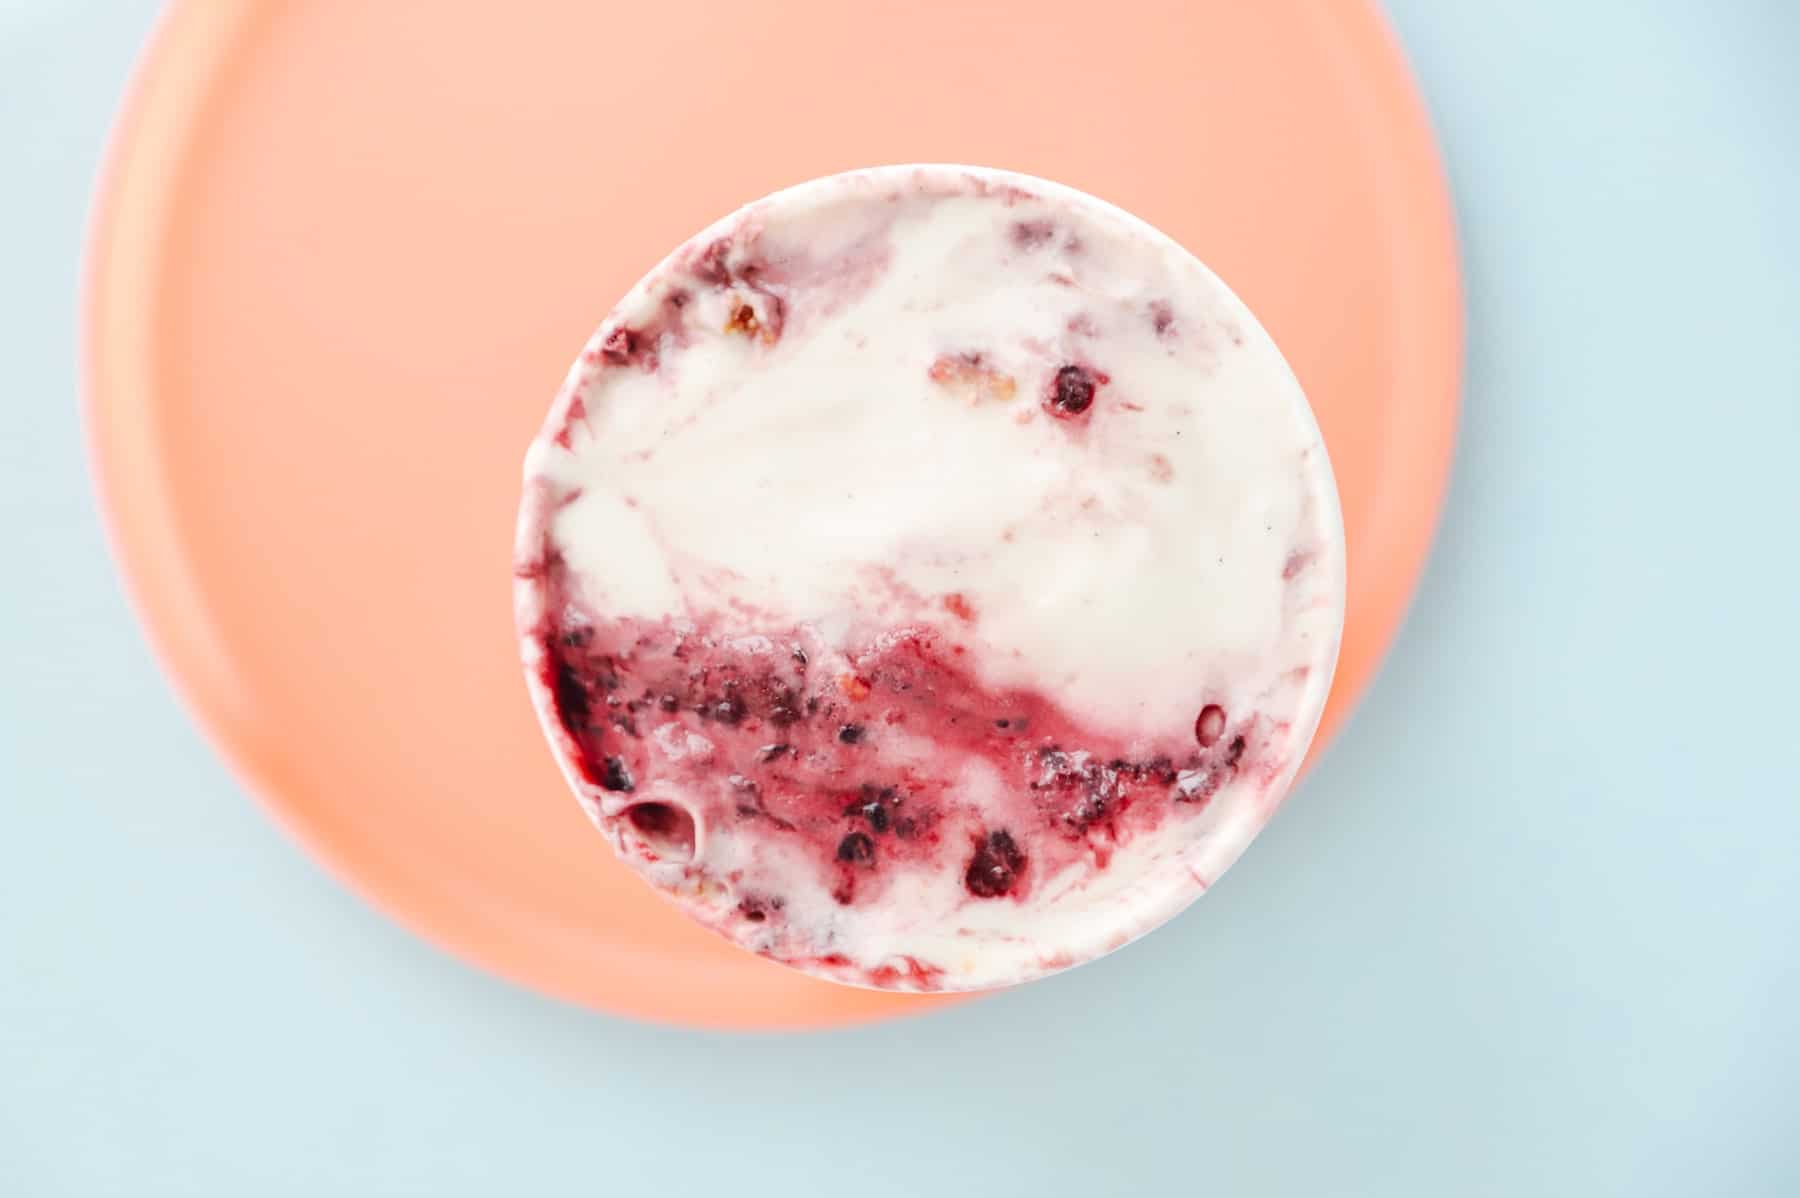 Close up of yogurt with blueberries mixed in on a light blue & pink background